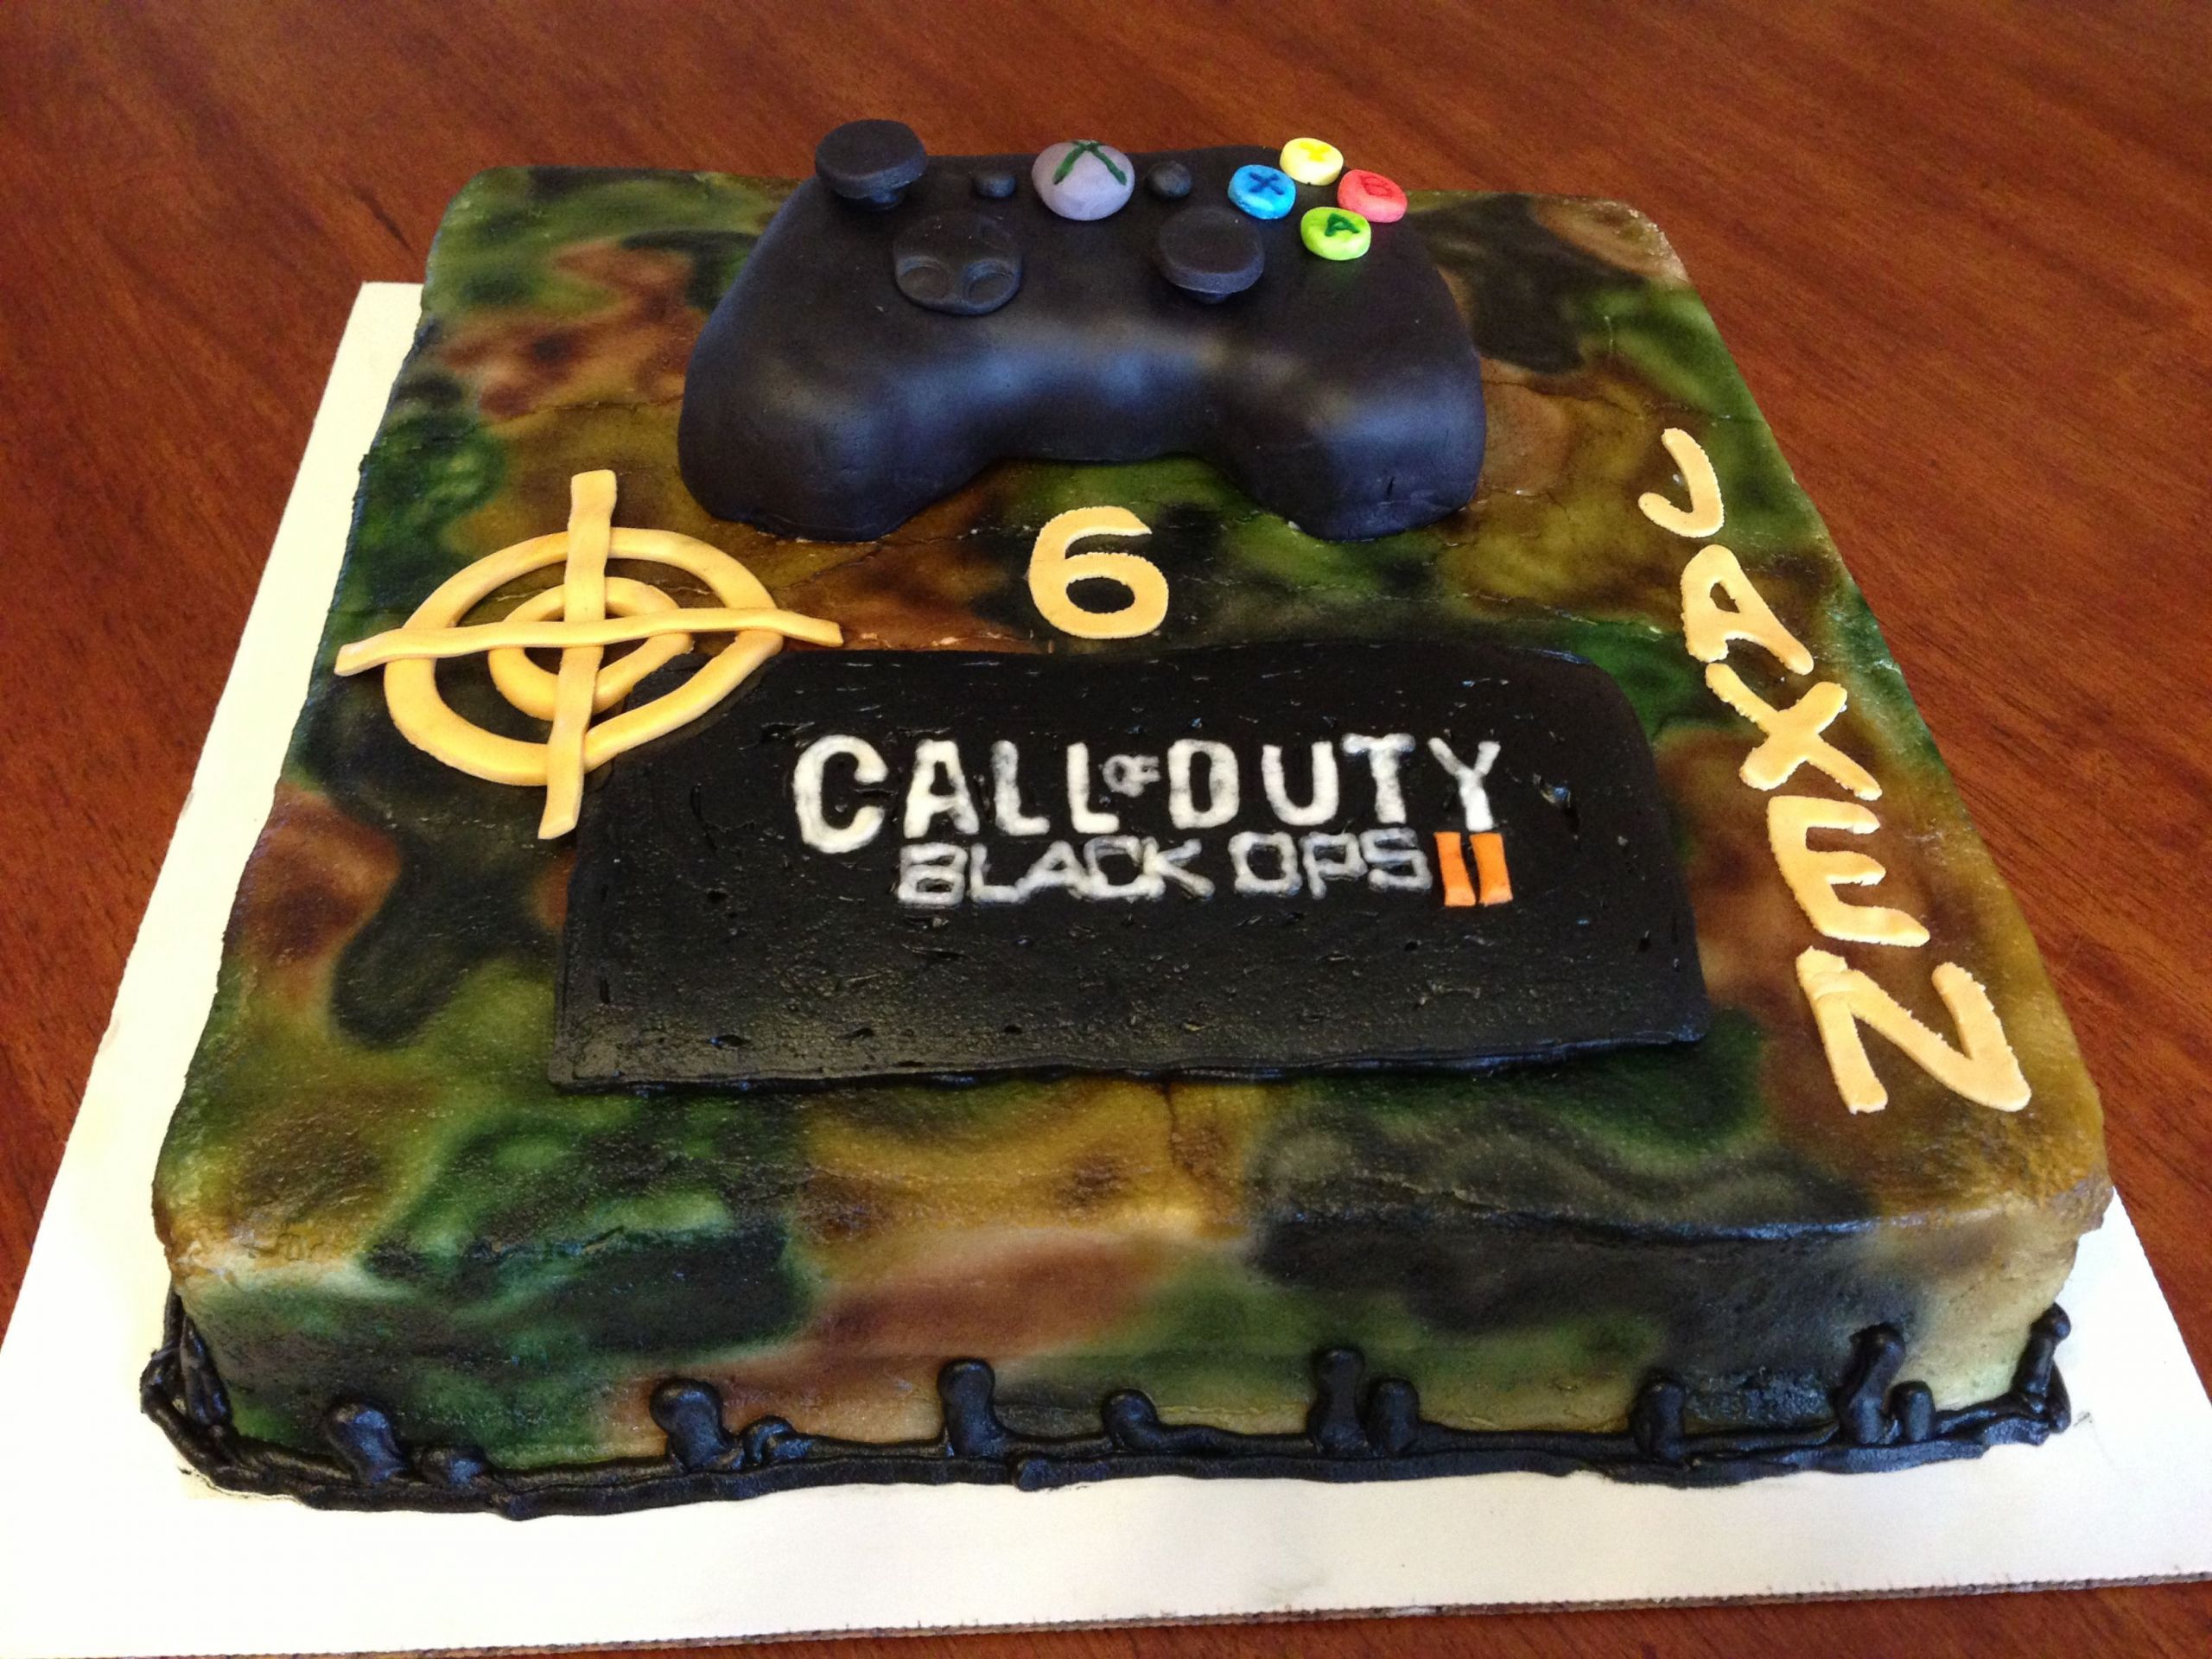 Call Of Duty Cake Recipe
 Call of Duty Black Ops Cake With edible remote controller